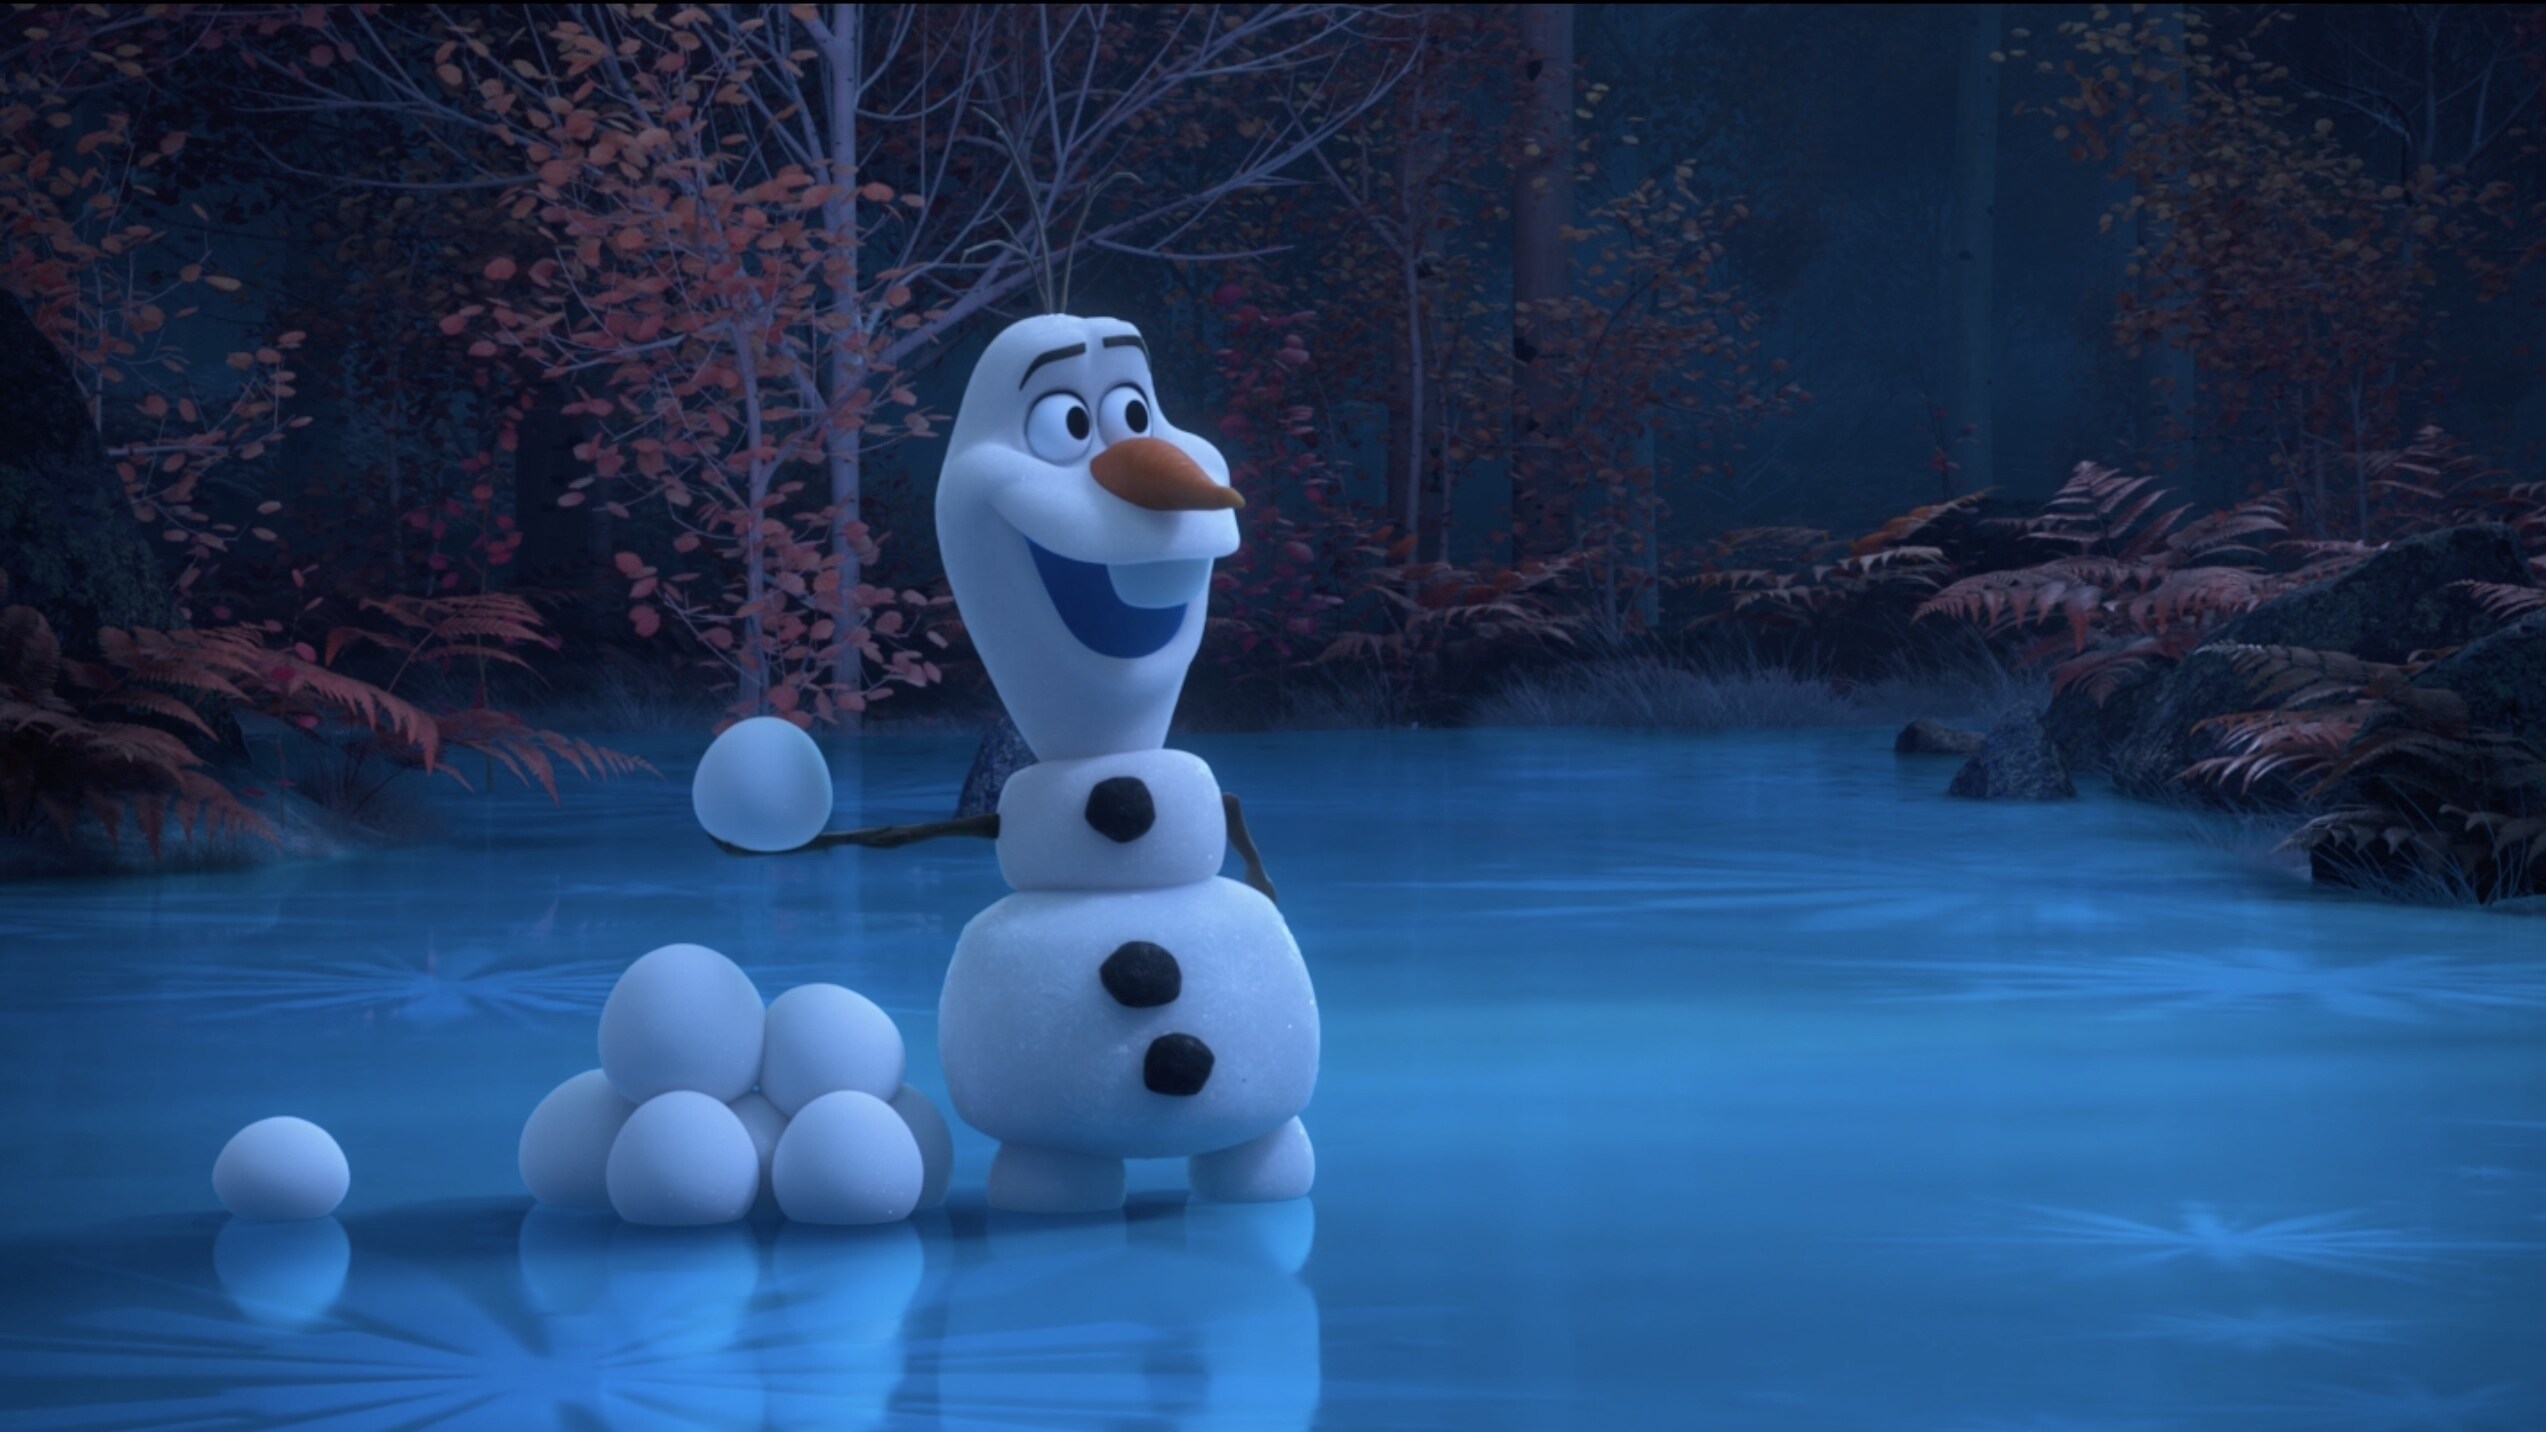 Watch the New Digital Series "At Home With Olaf"